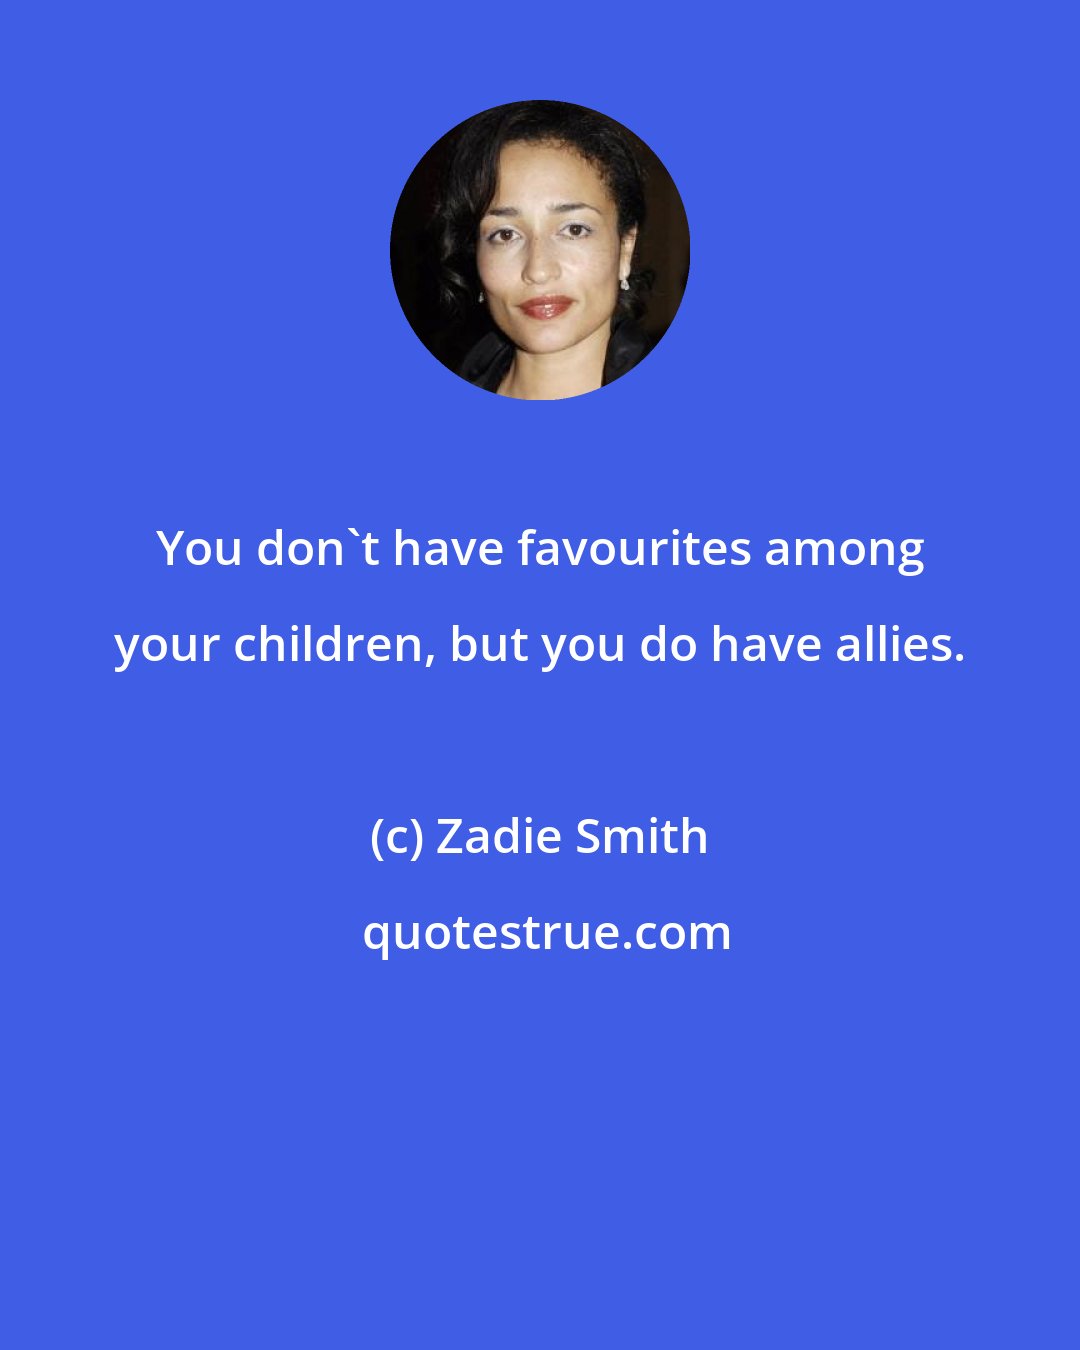 Zadie Smith: You don't have favourites among your children, but you do have allies.